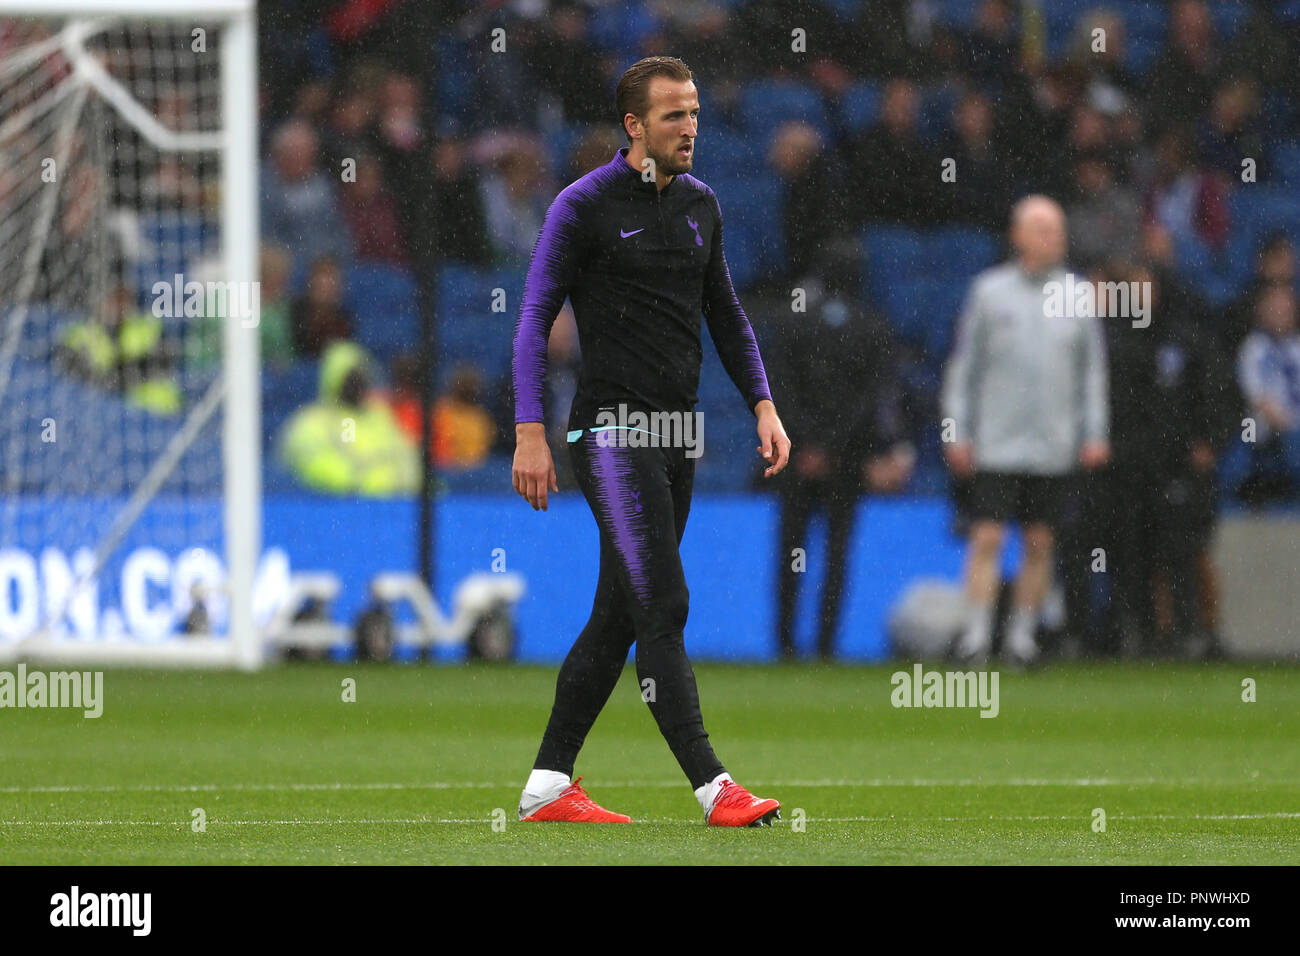 Tottenham Hotspur's Harry Kane during the Premier League match at the AMEX Stadium, Brighton. PRESS ASSOCIATION Photo. Picture date: Saturday September 22, 2018. See PA story SOCCER Brighton. Photo credit should read: Steven Paston/PA Wire. RESTRICTIONS: No use with unauthorised audio, video, data, fixture lists, club/league logos or 'live' services. Online in-match use limited to 120 images, no video emulation. No use in betting, games or single club/league/player publications. Stock Photo